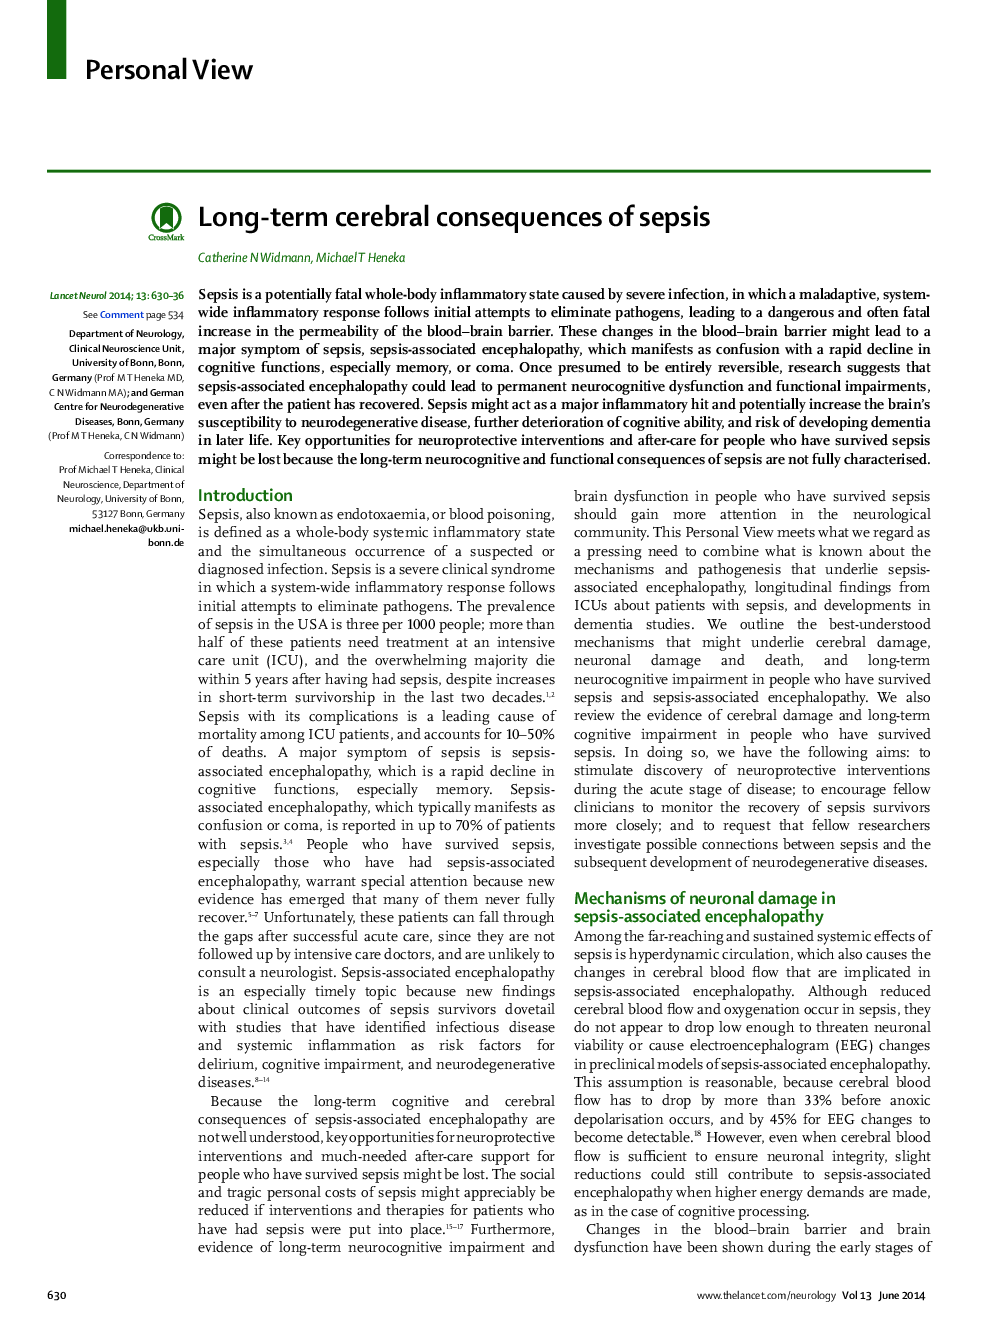 Long-term cerebral consequences of sepsis